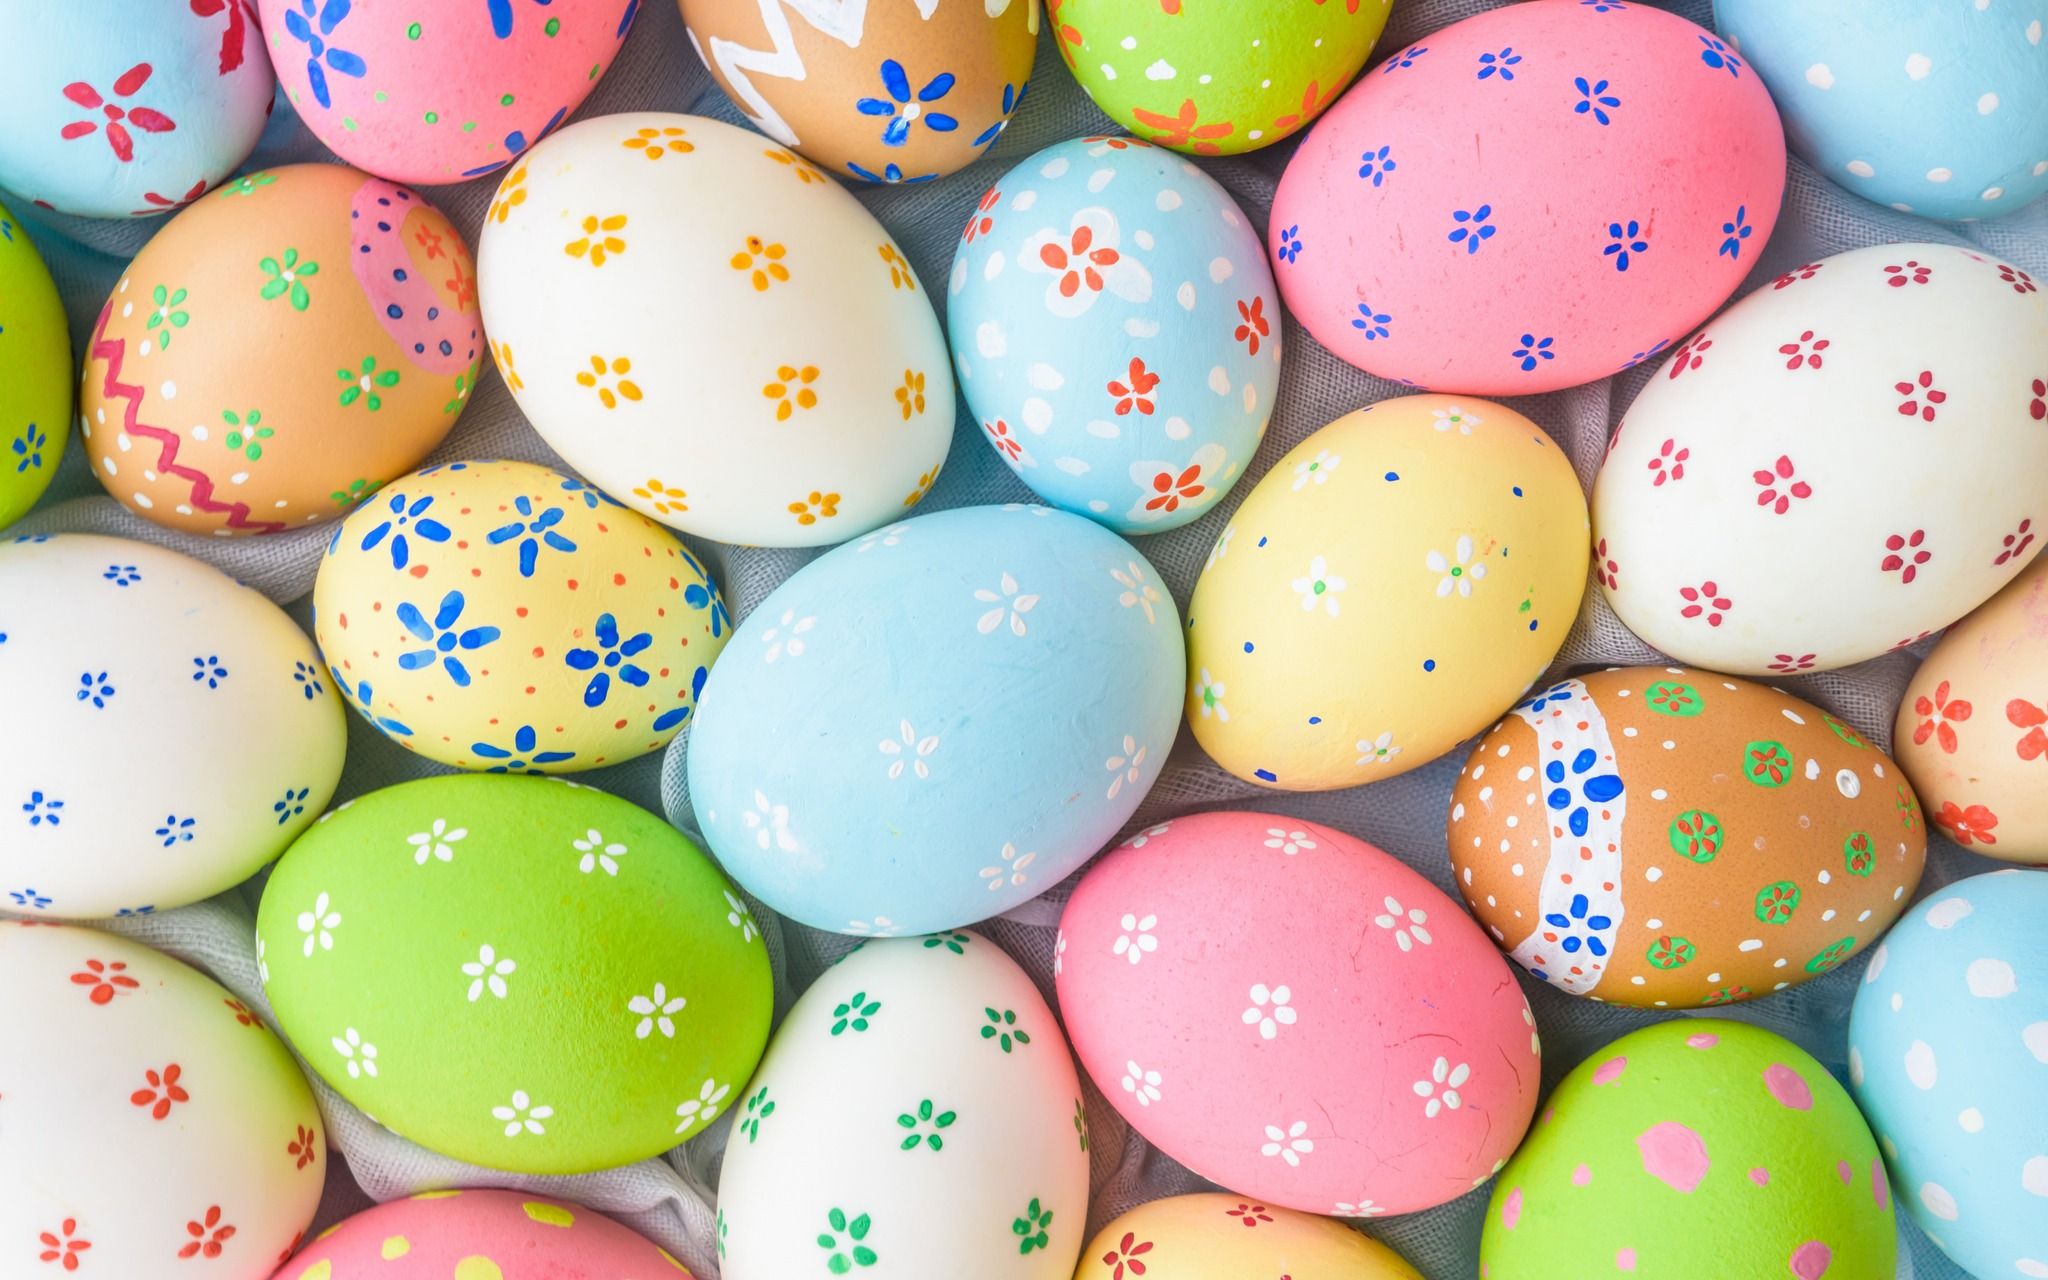 A collection of colorful Easter eggs with floral designs. - Easter, egg